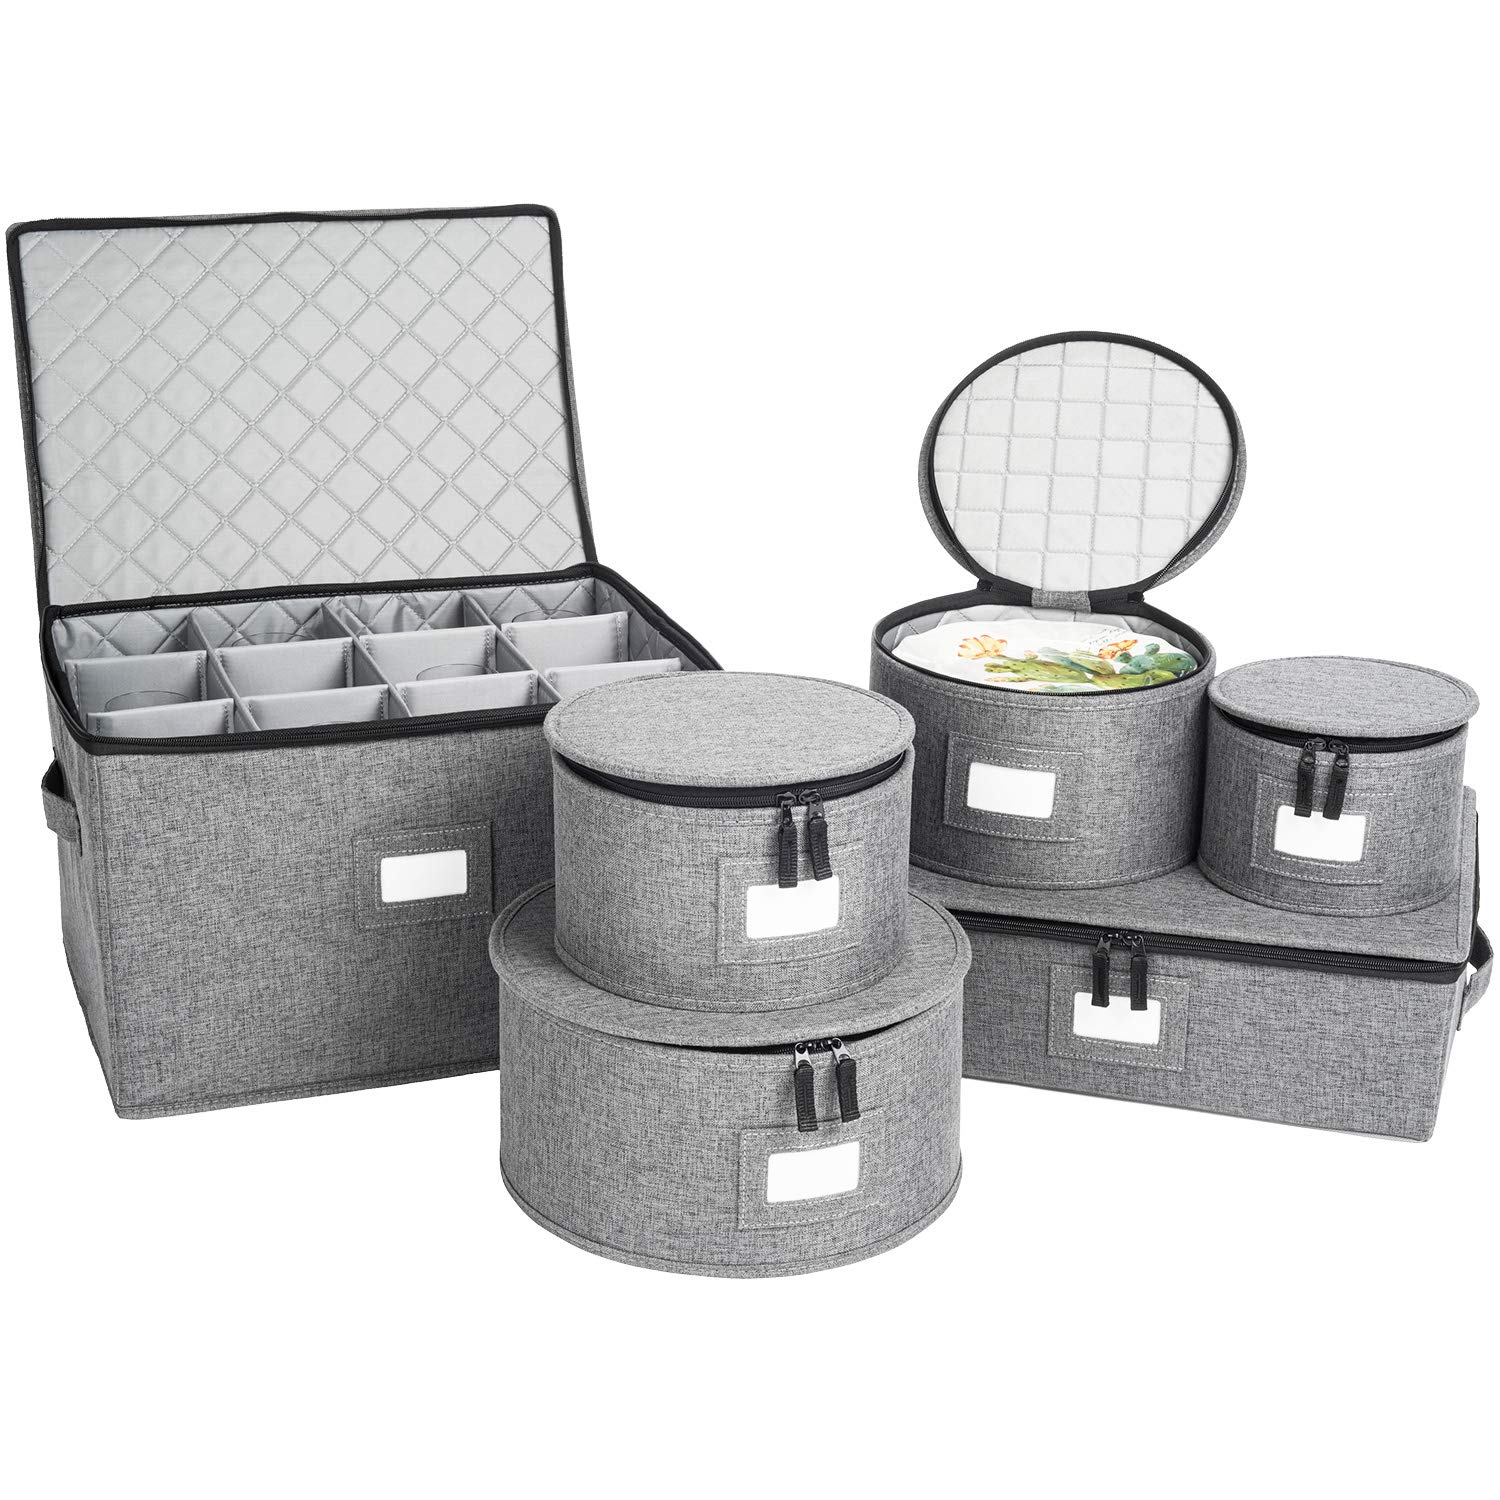 China Storage Set, Hard Shell and Stackable, for Dinnerware Storage and Transport, Protects Dishes Cups and Wine Glasses, Felt Plate Dividers Included(6 Piece Hard Shell Set for China Storage)